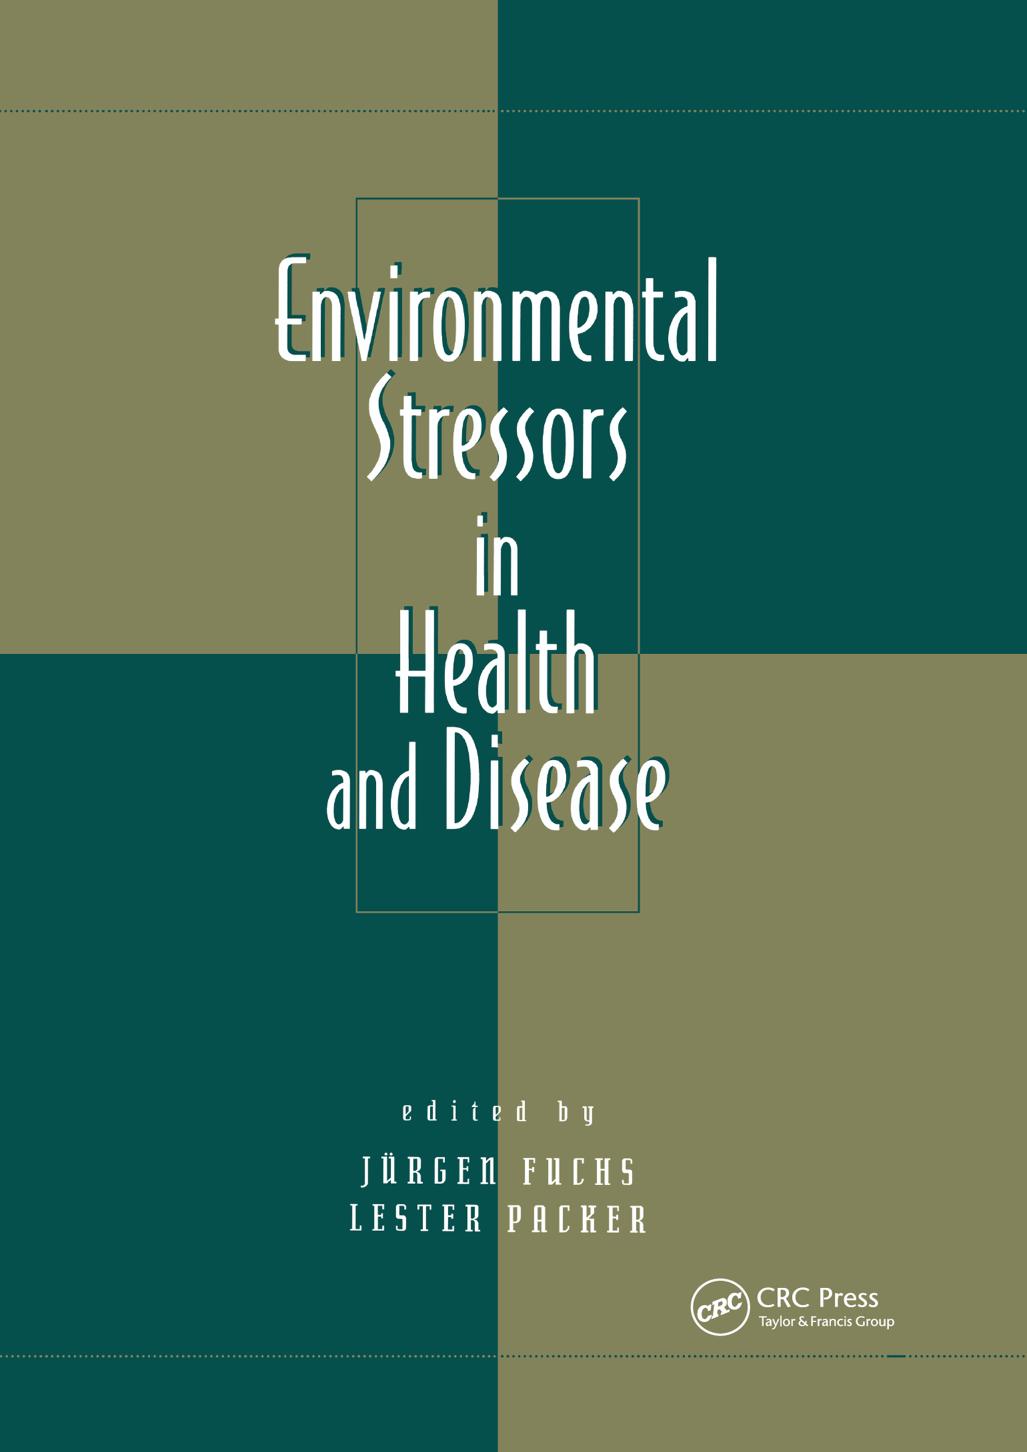 Environmental stressors in health and disease